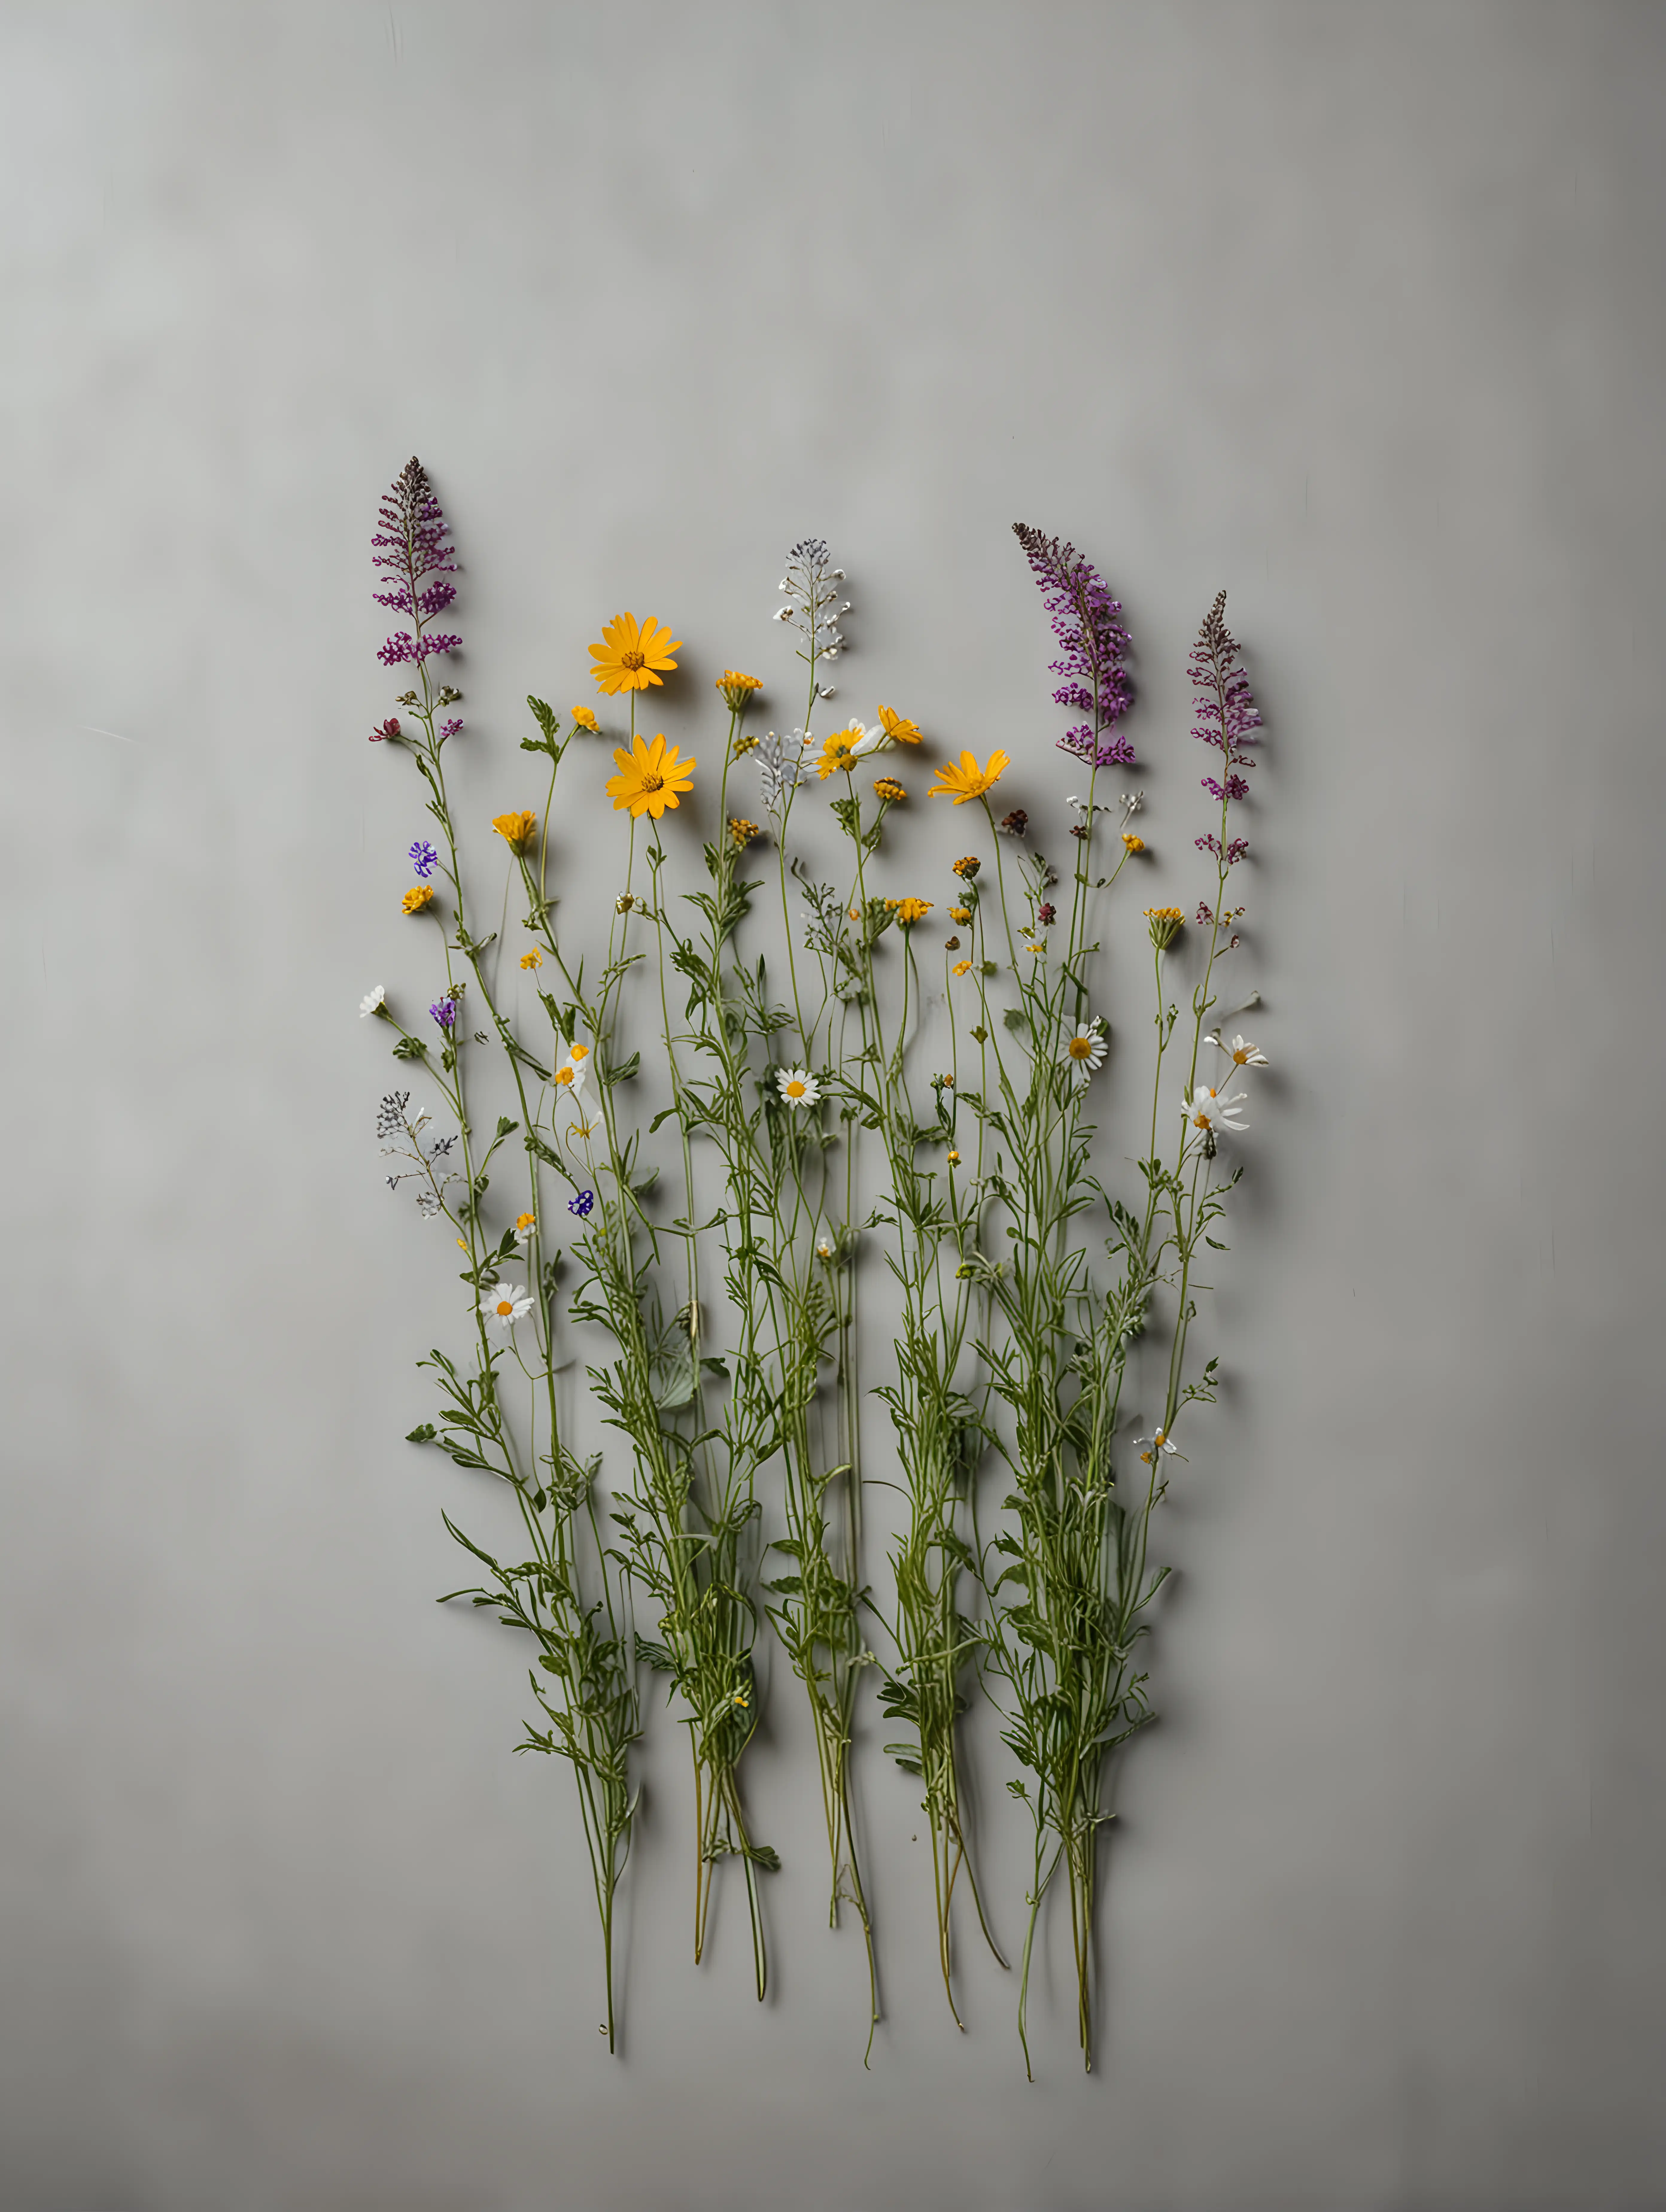 Colorful Wildflowers Bordering Neutral Gray Background